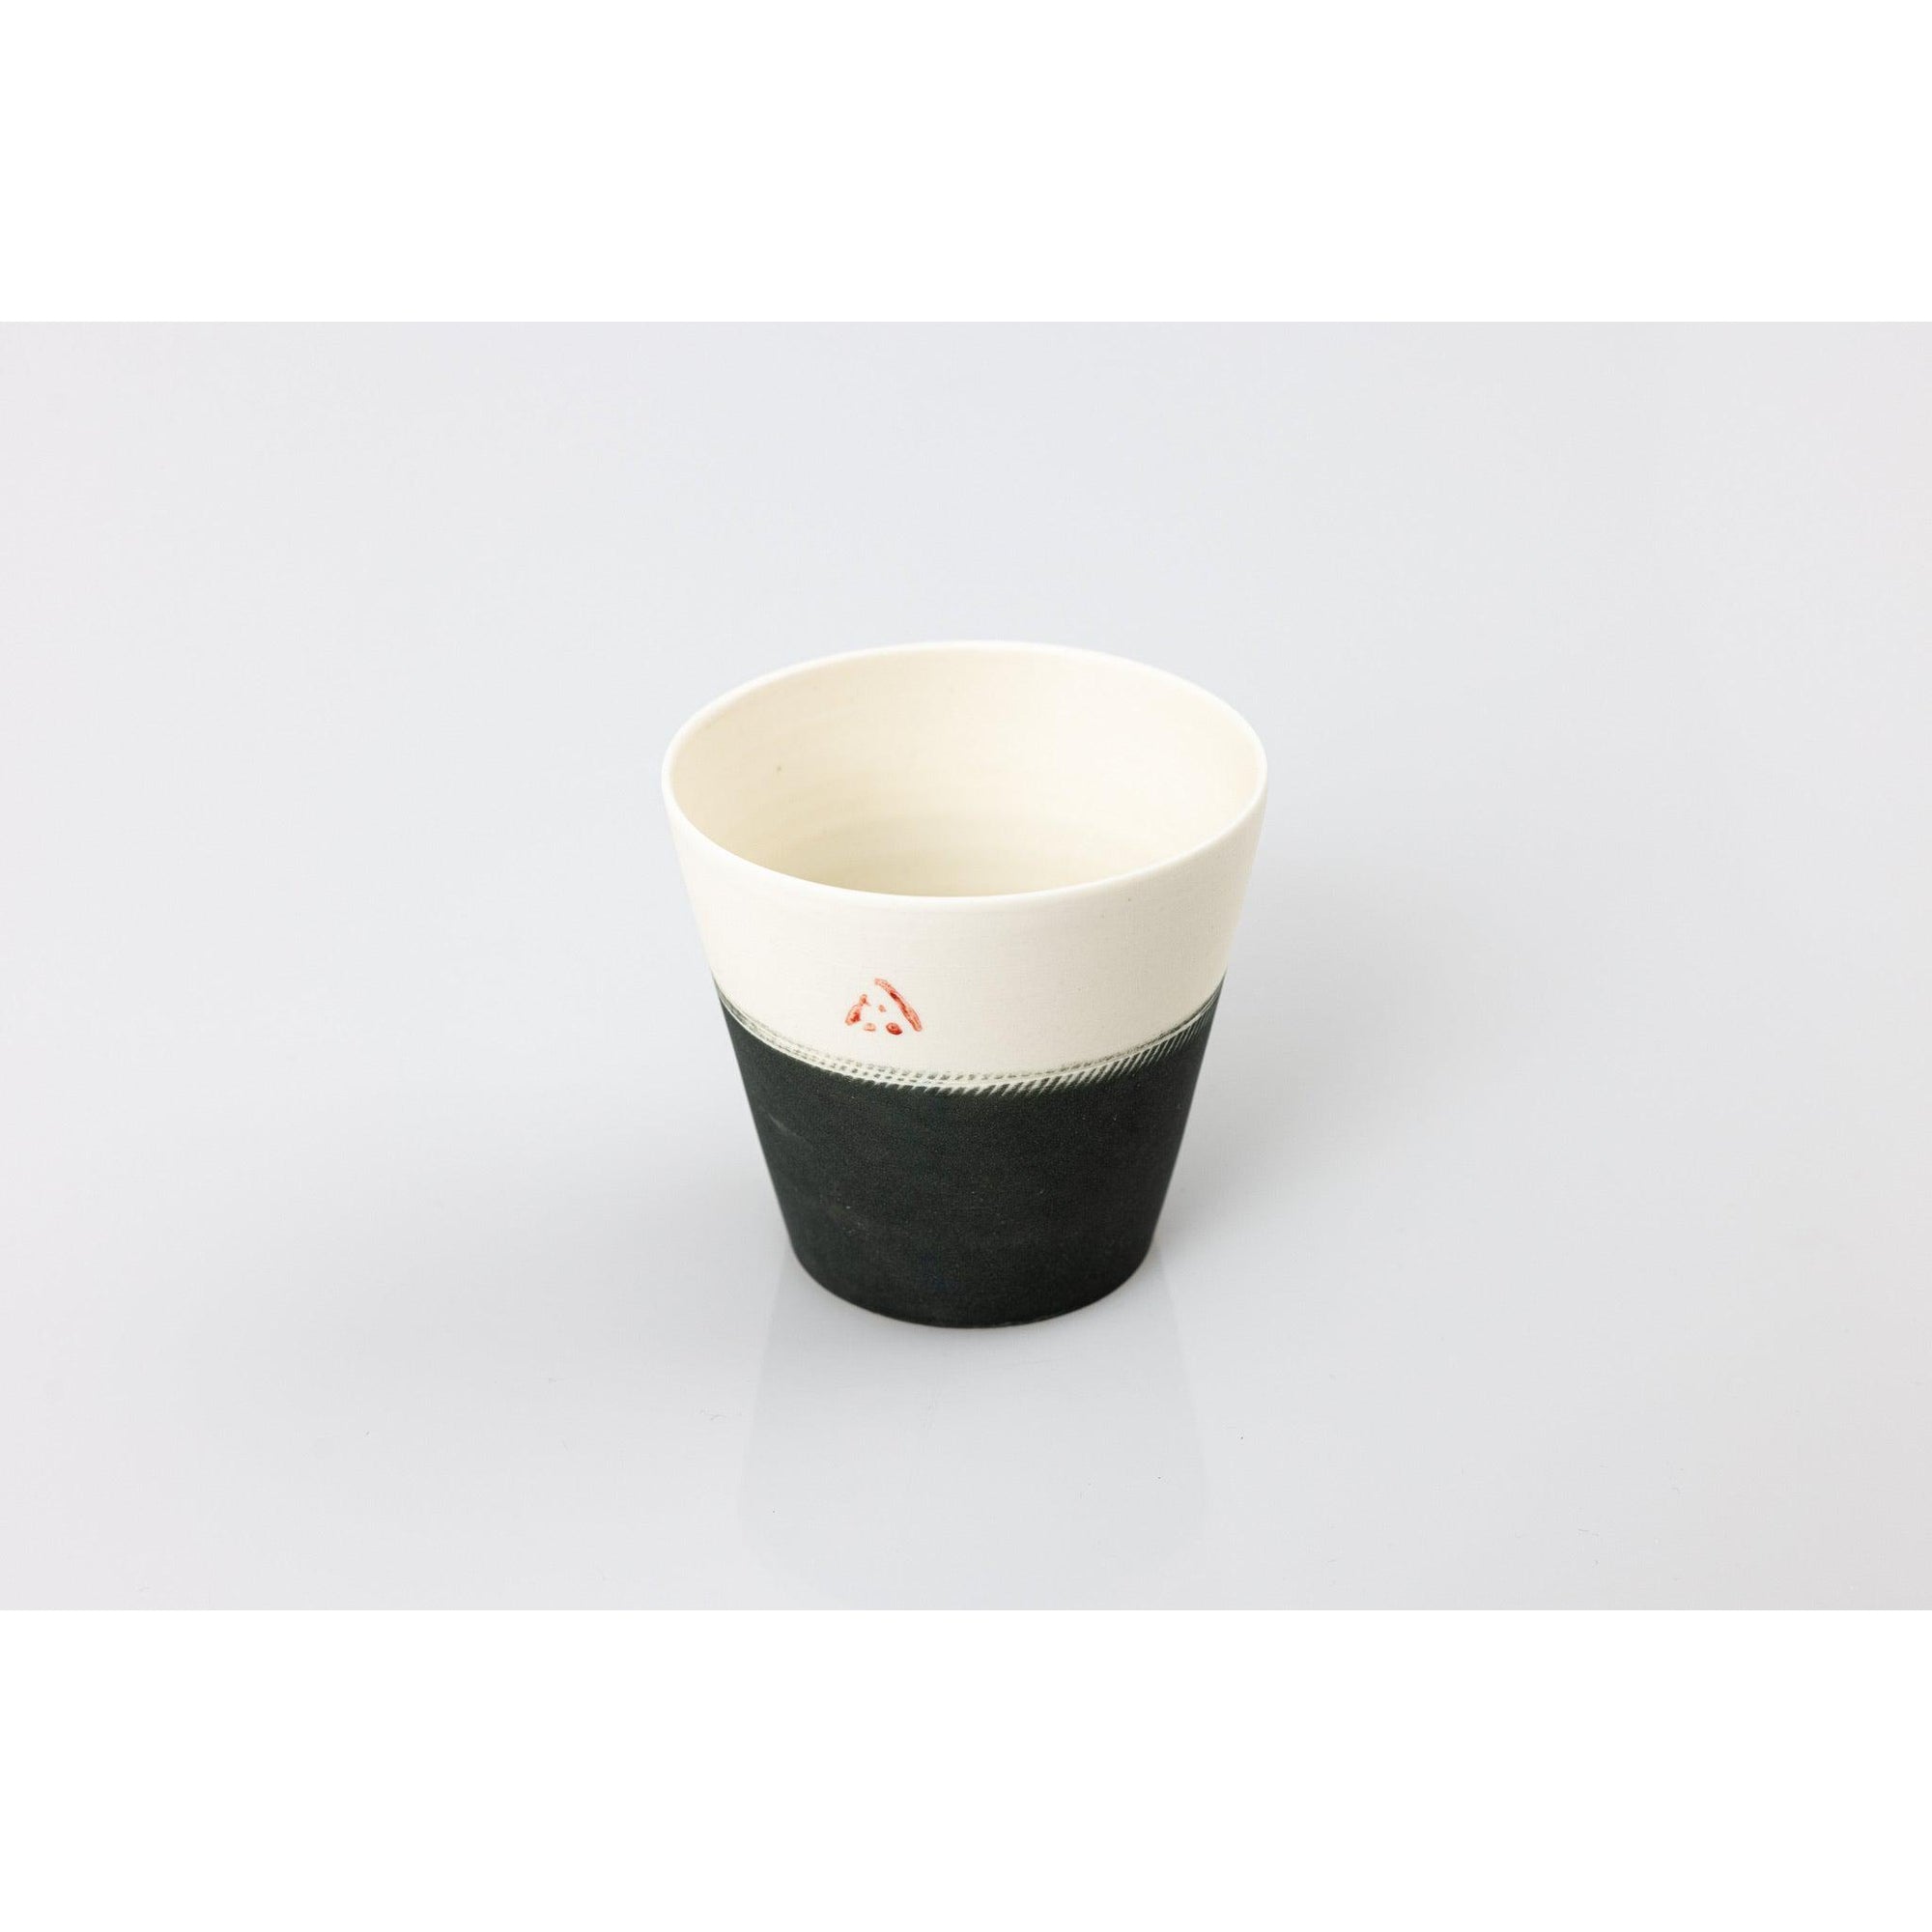 PG68 Small Cup, by Ali Tomlin, available at Padstow Gallery, Cornwall